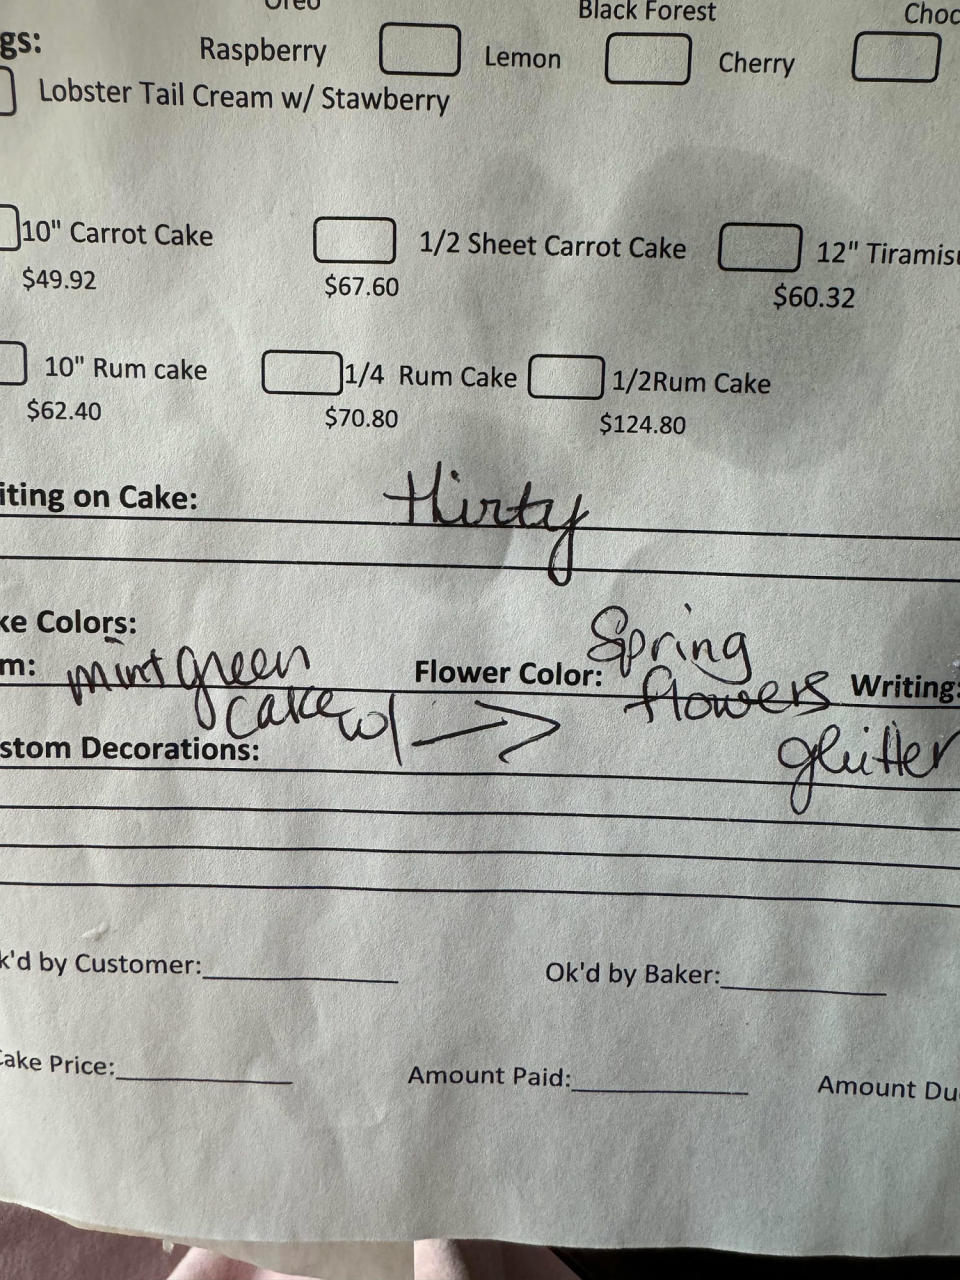 The completed form for the cake. (Courtesy John Ellis)